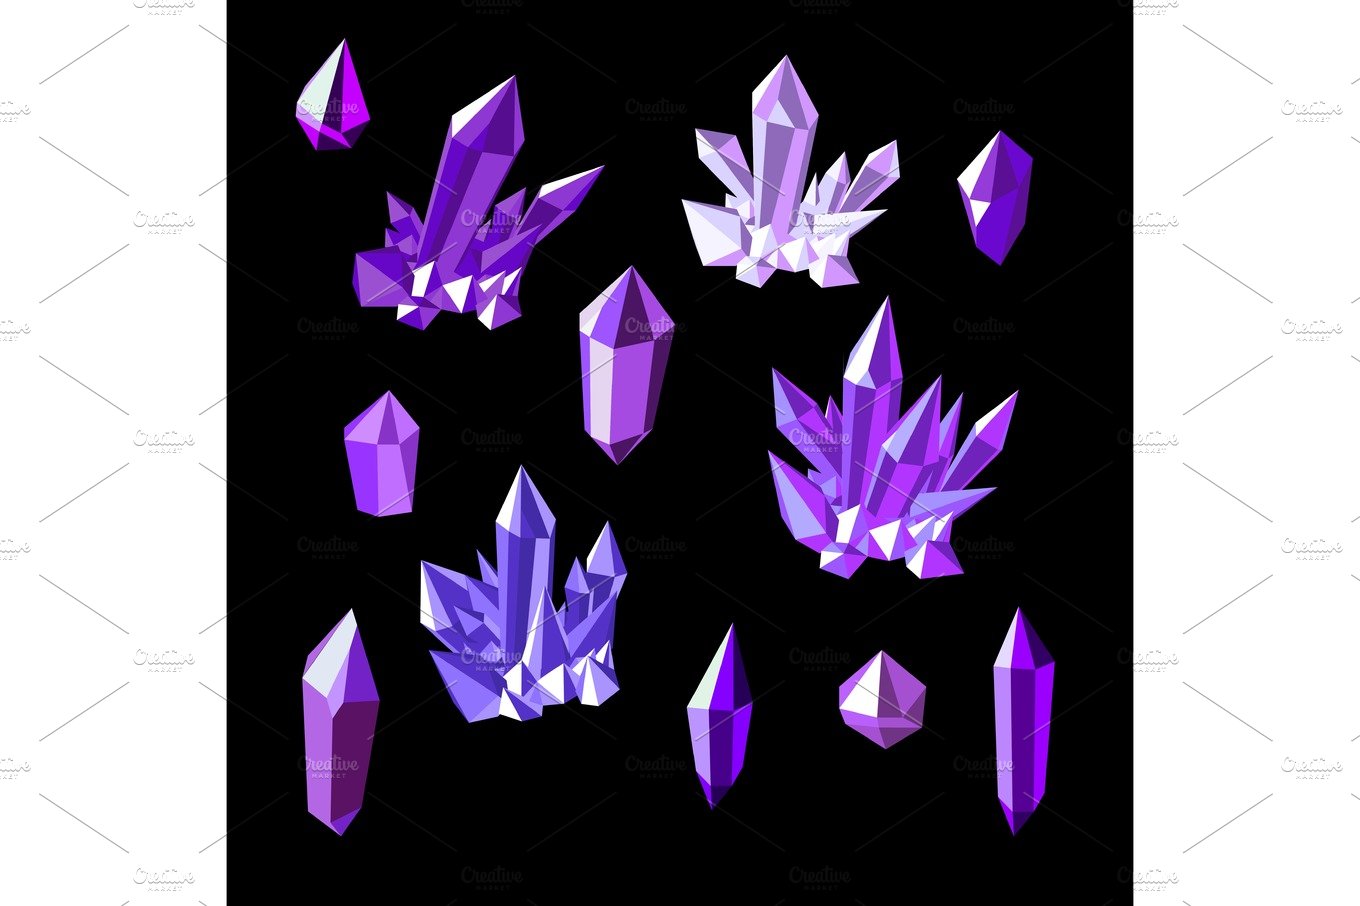 Set of amethyst crystals cover image.